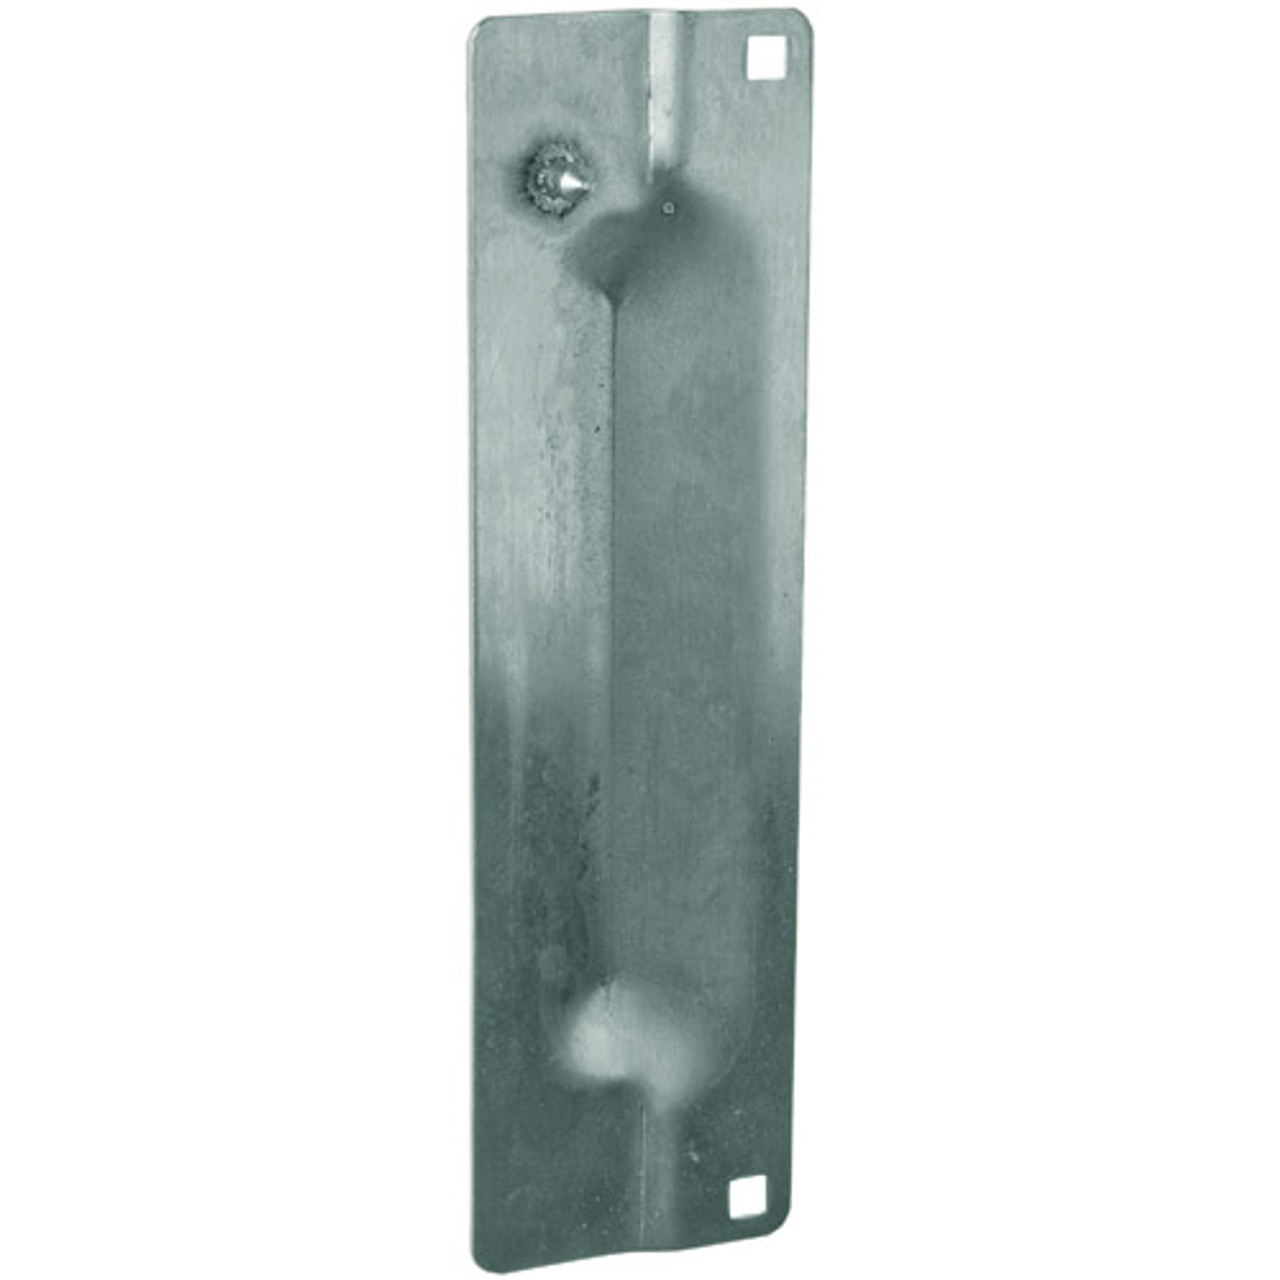 PMLP-111-630 Don Jo Latch Protector in Satin Stainless Steel Finish